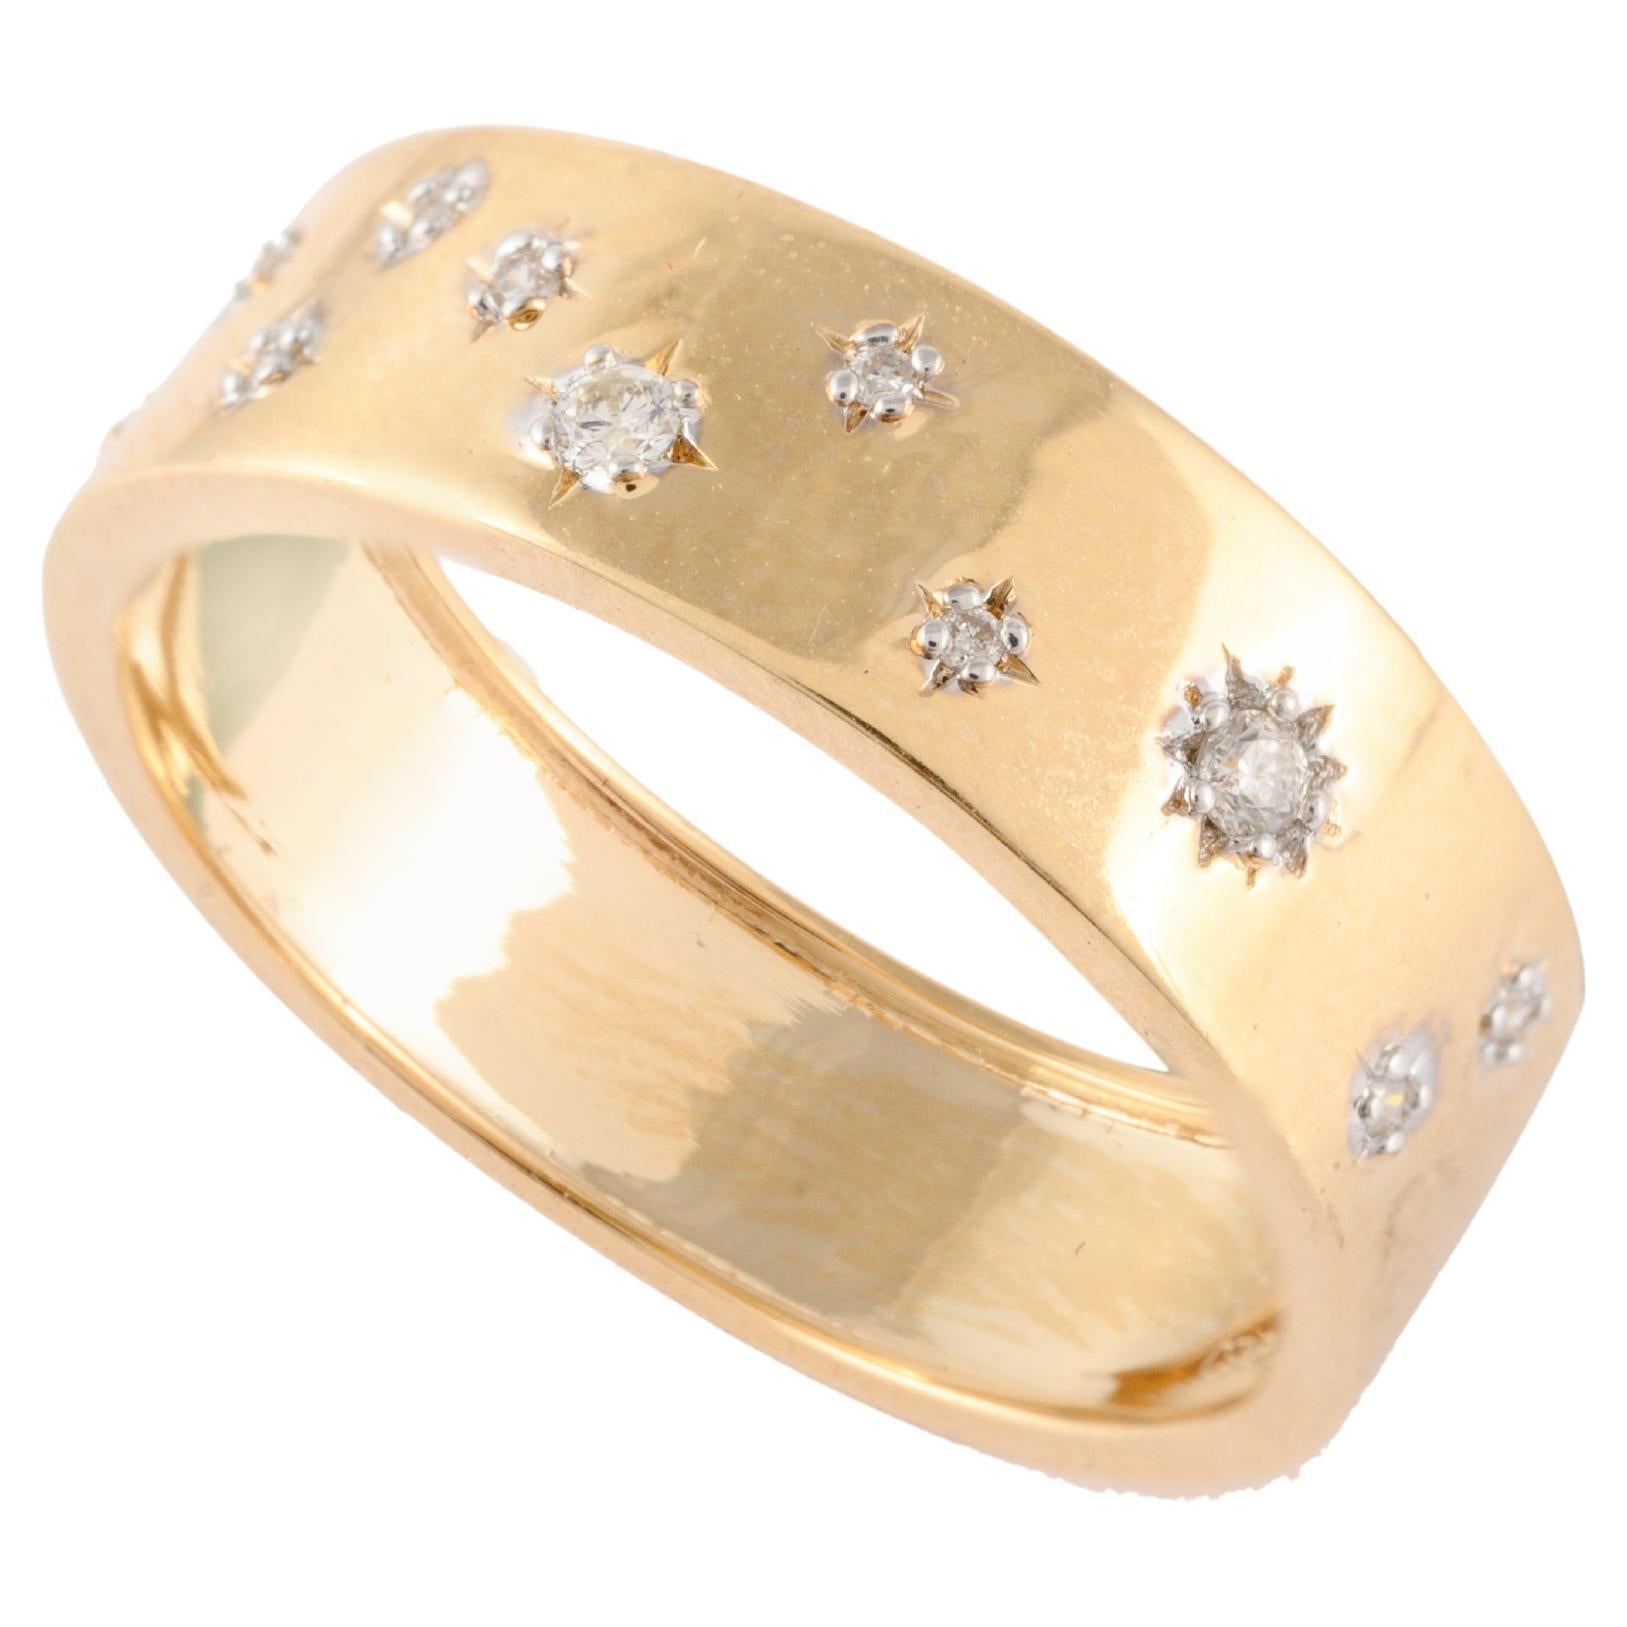 For Sale:  Genuine Diamond Stardust Astral Unisex Band Ring in 18k Solid Yellow Gold